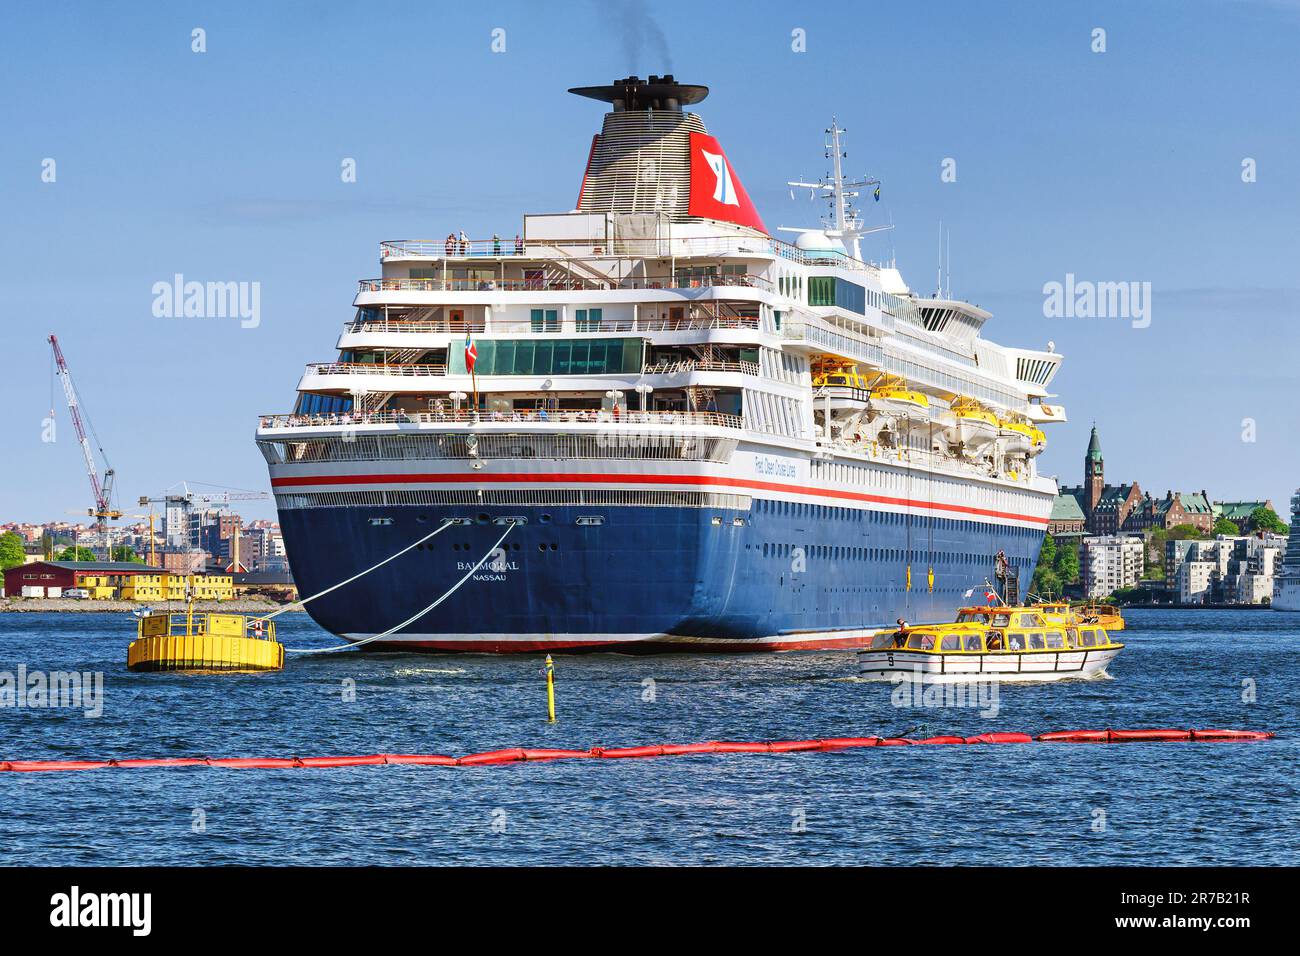 The Fred. Olsen Cruise Lines' cruise ship Balmoral berthed at Stockholm, Sweden. Stock Photo